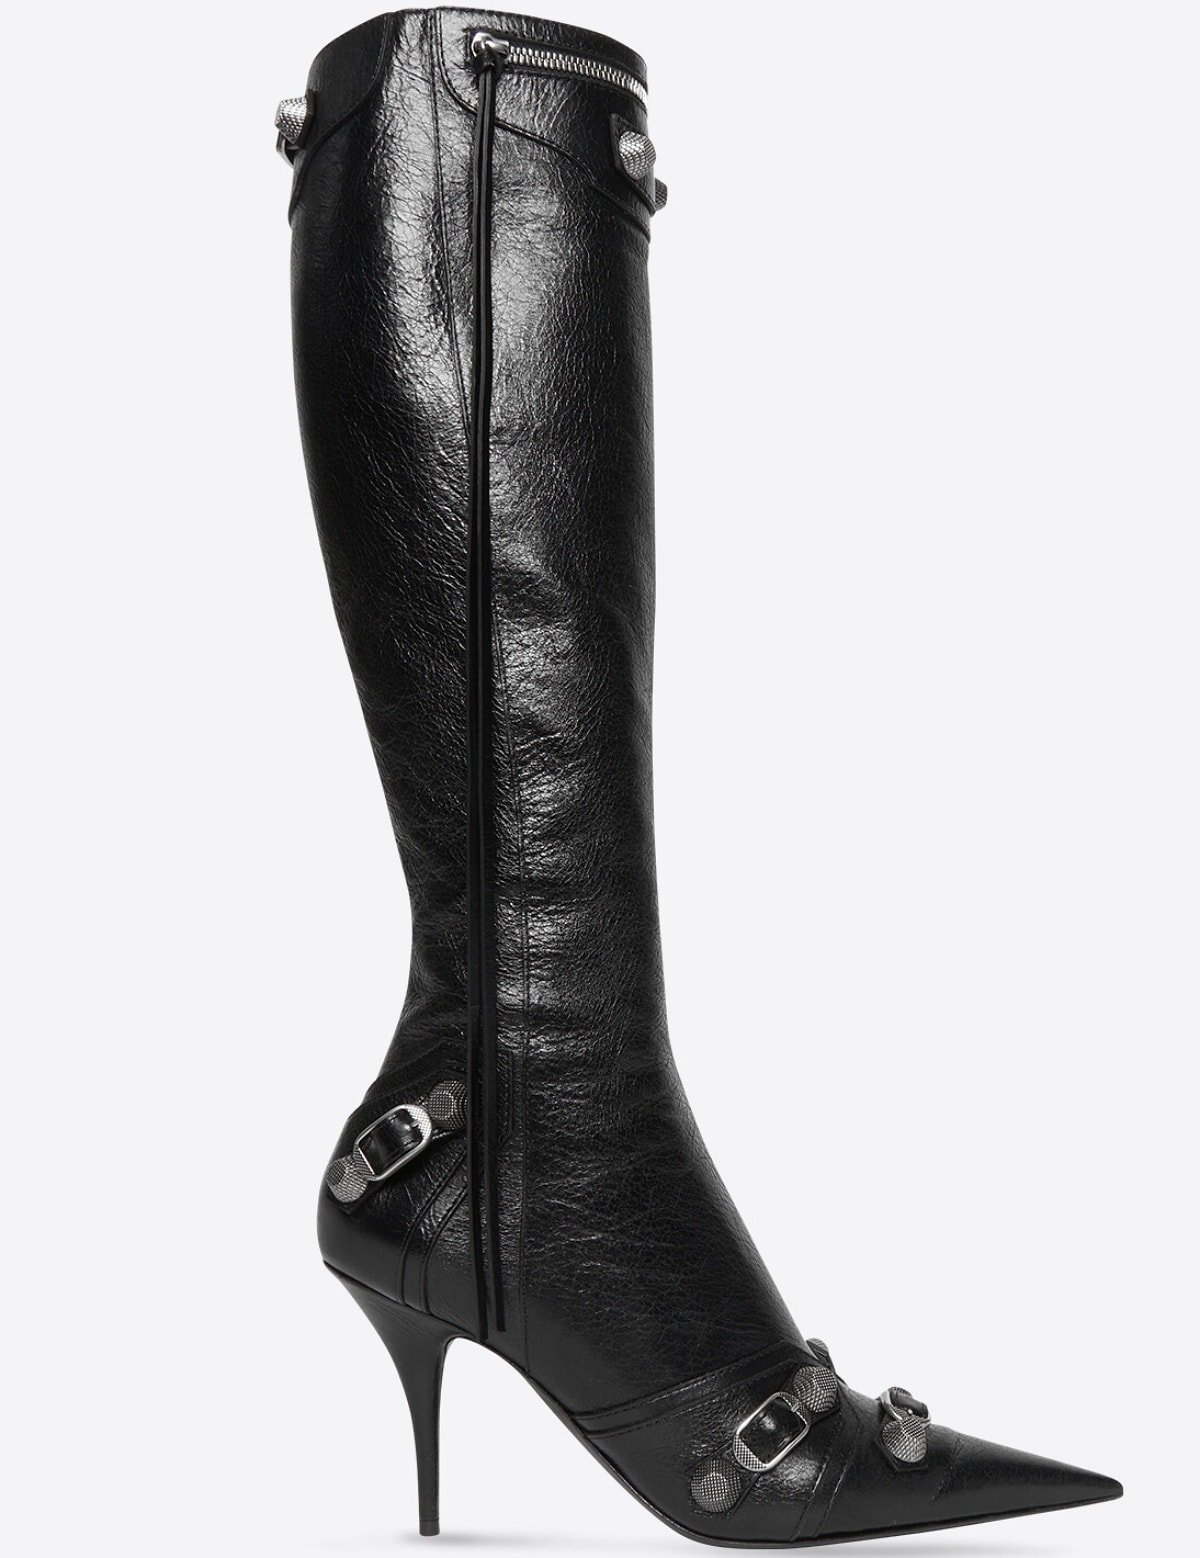 These Balenciaga Cagole boots feature pointed toes, decorative zipper trim, and aged silver hardware